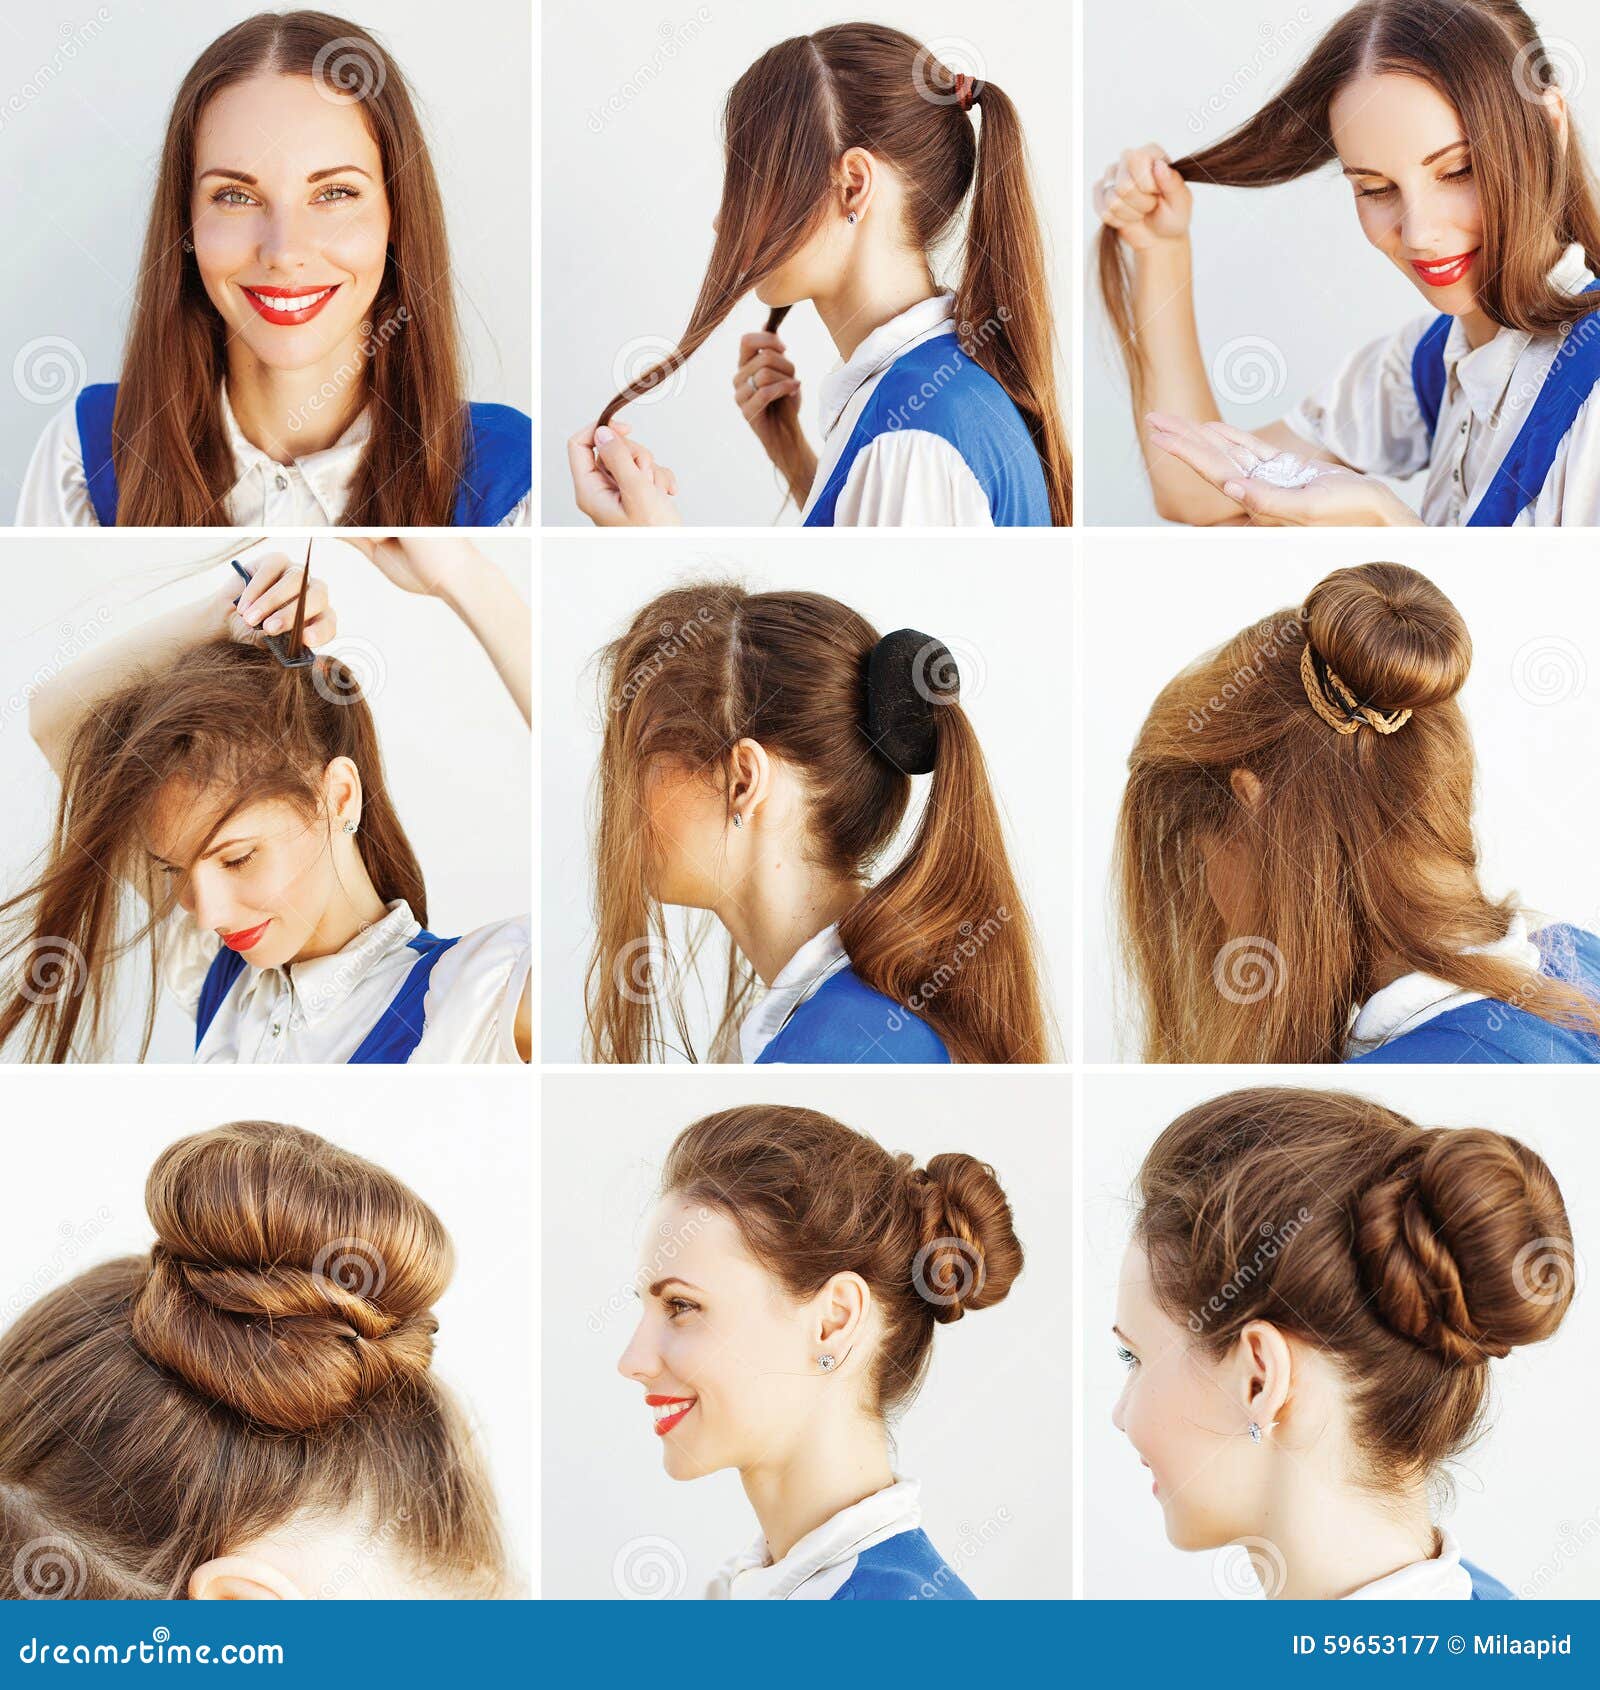 step by step hairstyle idea for blog stock image - image of